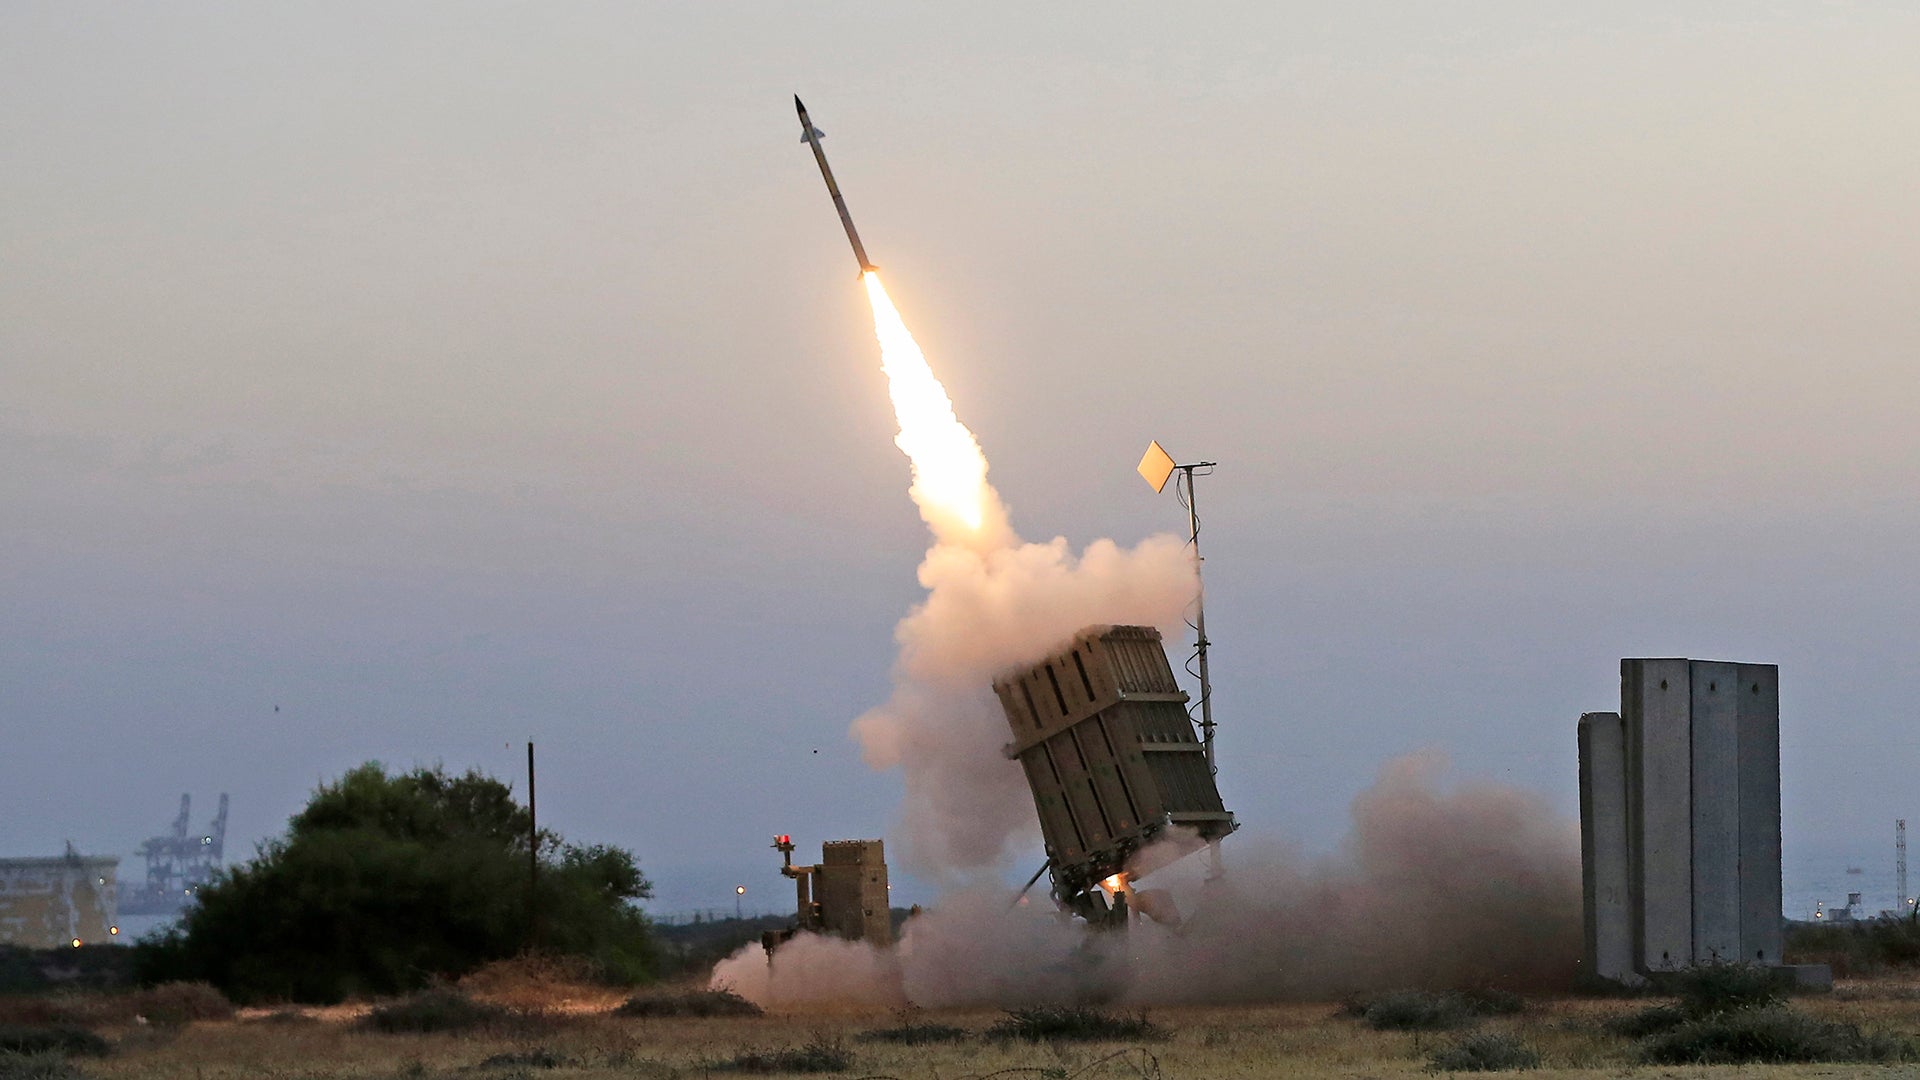 Continuous Mass Rocket Attacks Pose New Challenges For Israel’s Iron Dome System